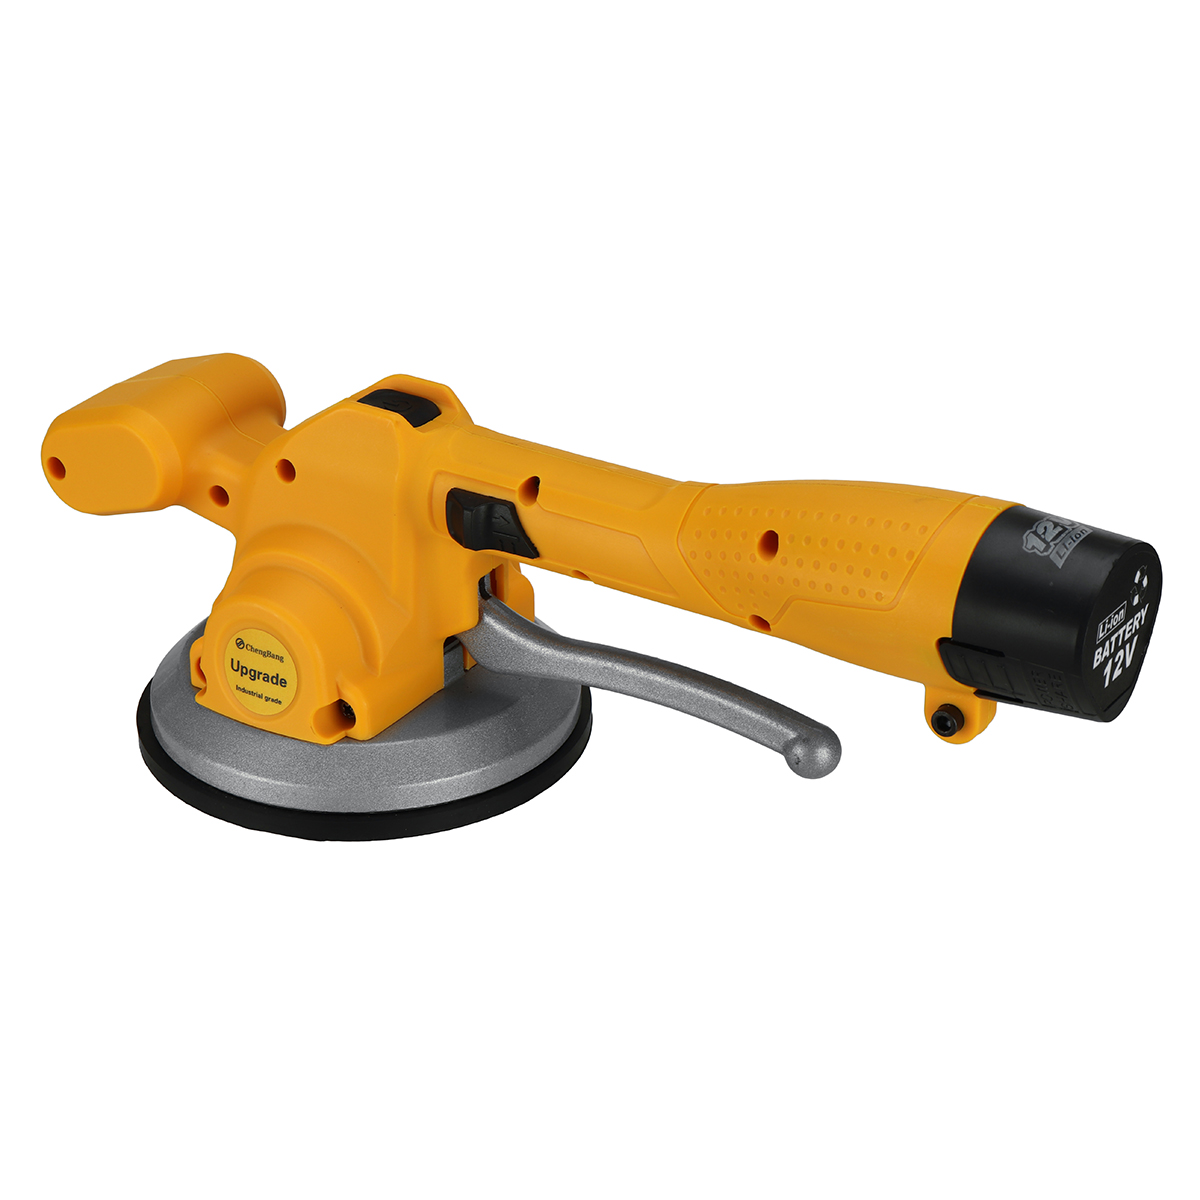 Find Electric Tile Tiling Machine Leveling Tools Vibrator 6 Gears Adjustable Professional Tiling Tools Machine Floor Laying for Sale on Gipsybee.com with cryptocurrencies